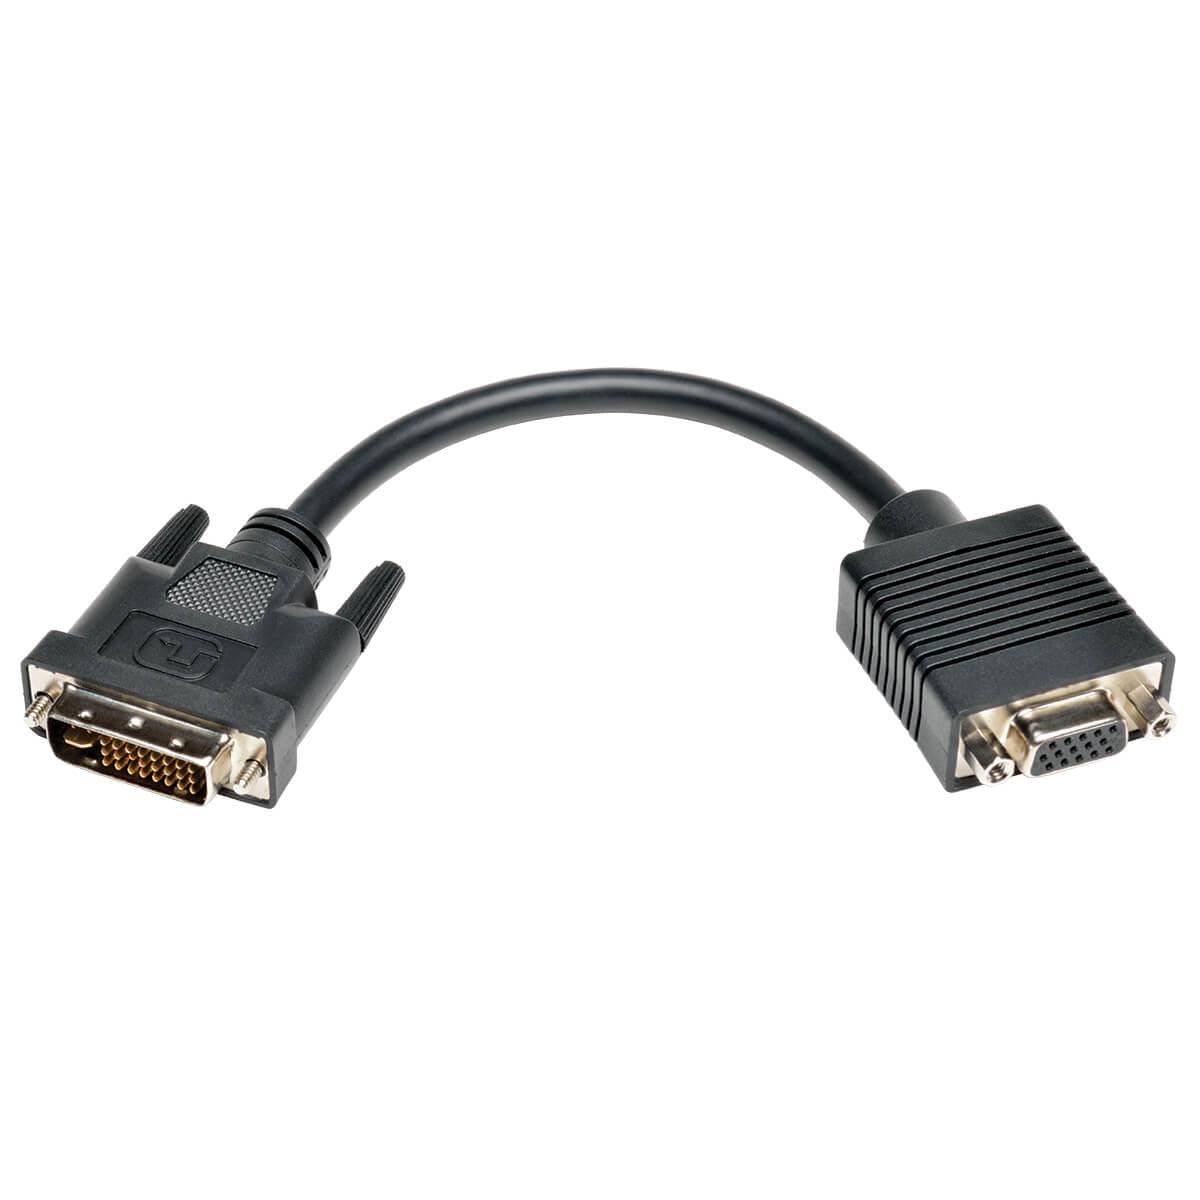 Tripp Lite P120-08N Dvi To Vga Adapter Cable (Dvi-I Dual-Link To Hd15 M/F), 8 In. (20.3 Cm)